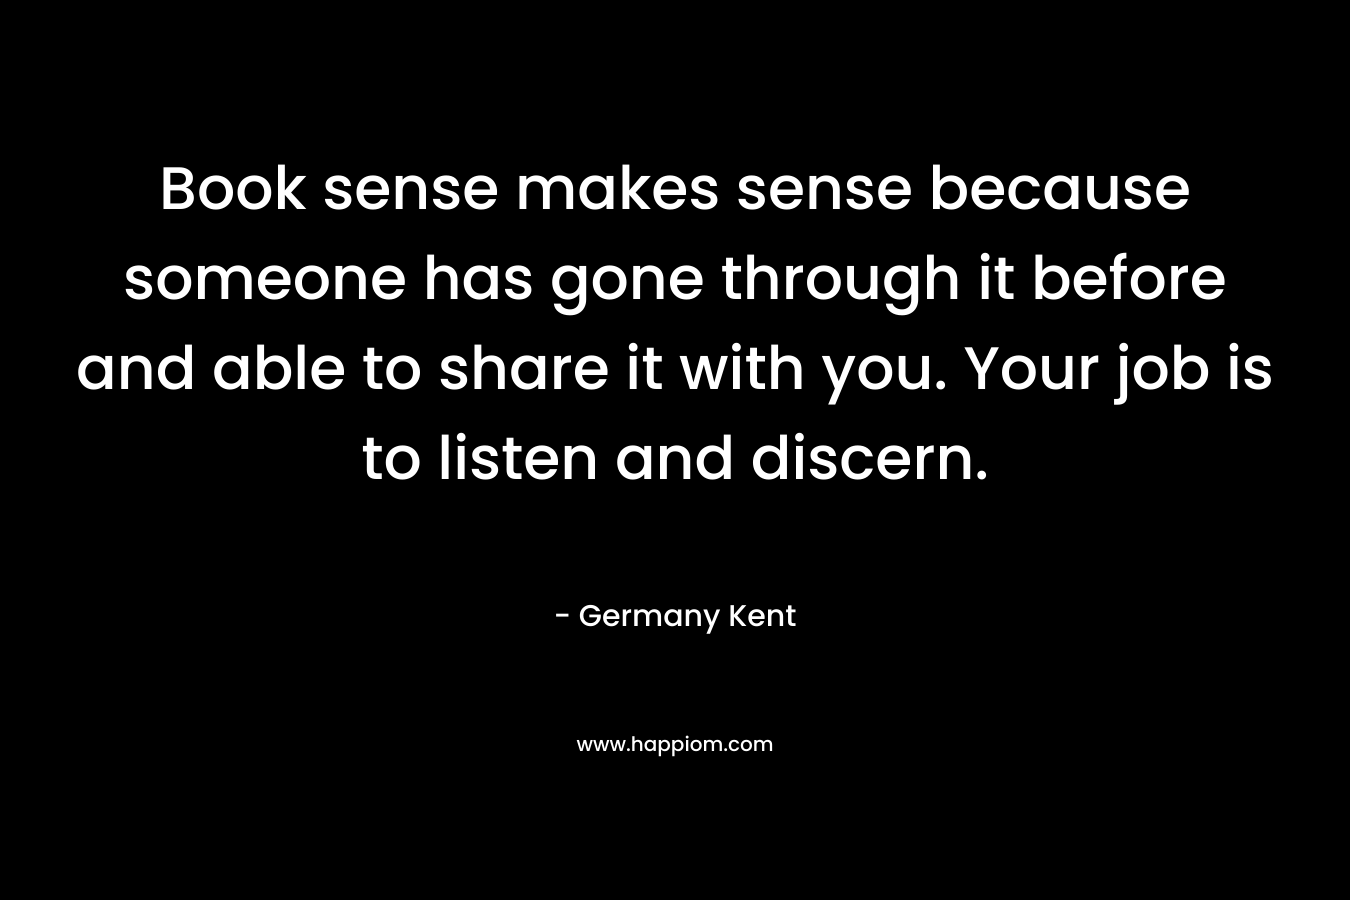 Book sense makes sense because someone has gone through it before and able to share it with you. Your job is to listen and discern.